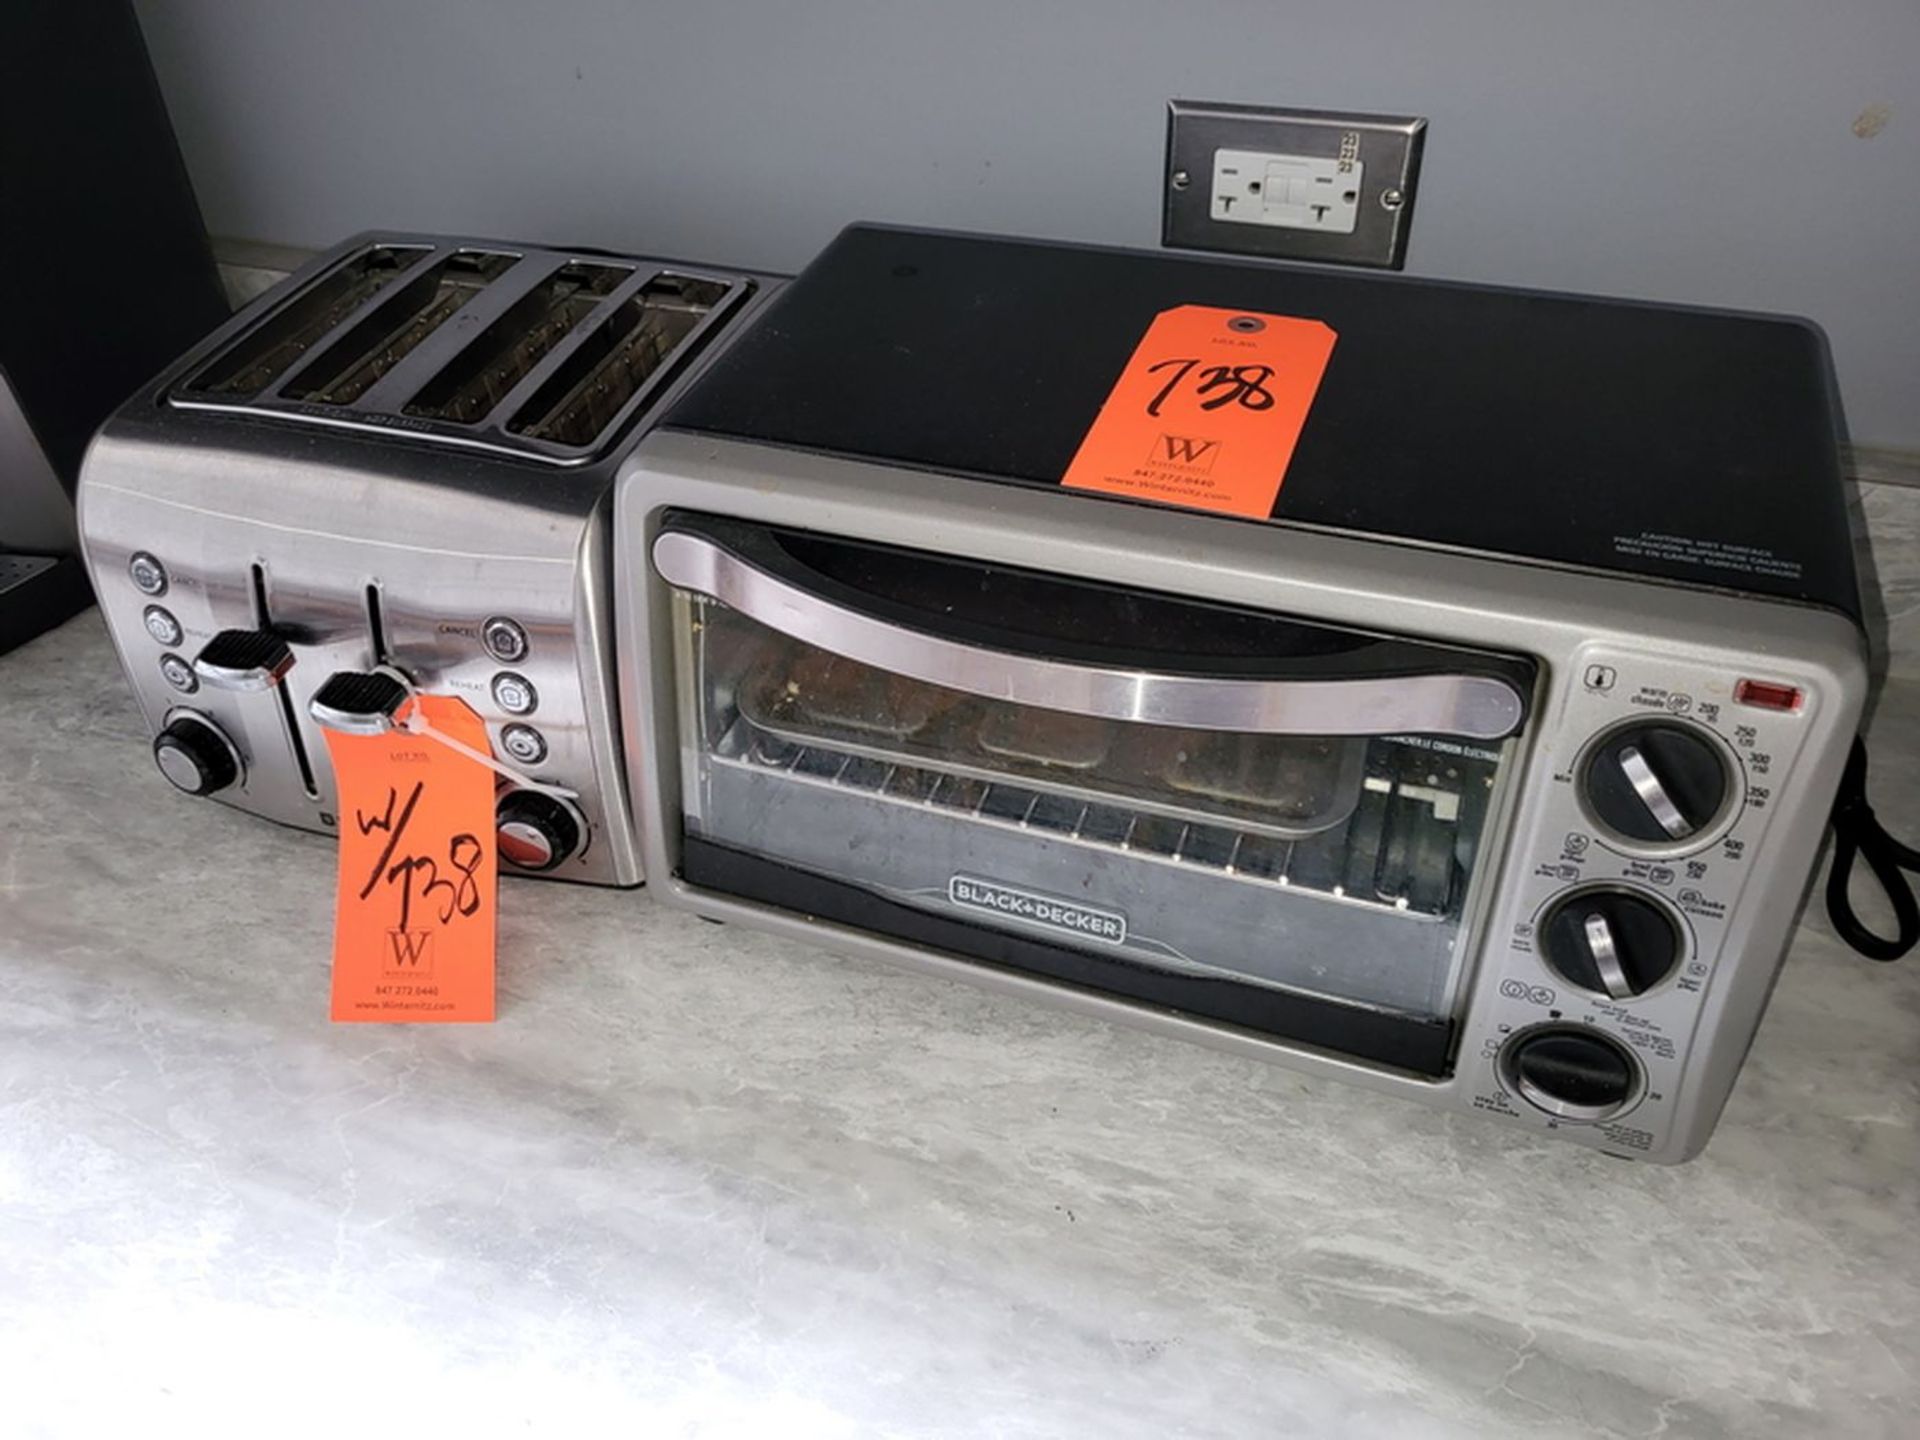 Lot - (1) Black & Decker Model TO1313SBD Toaster Oven, and (1) Toastmaster Toaster